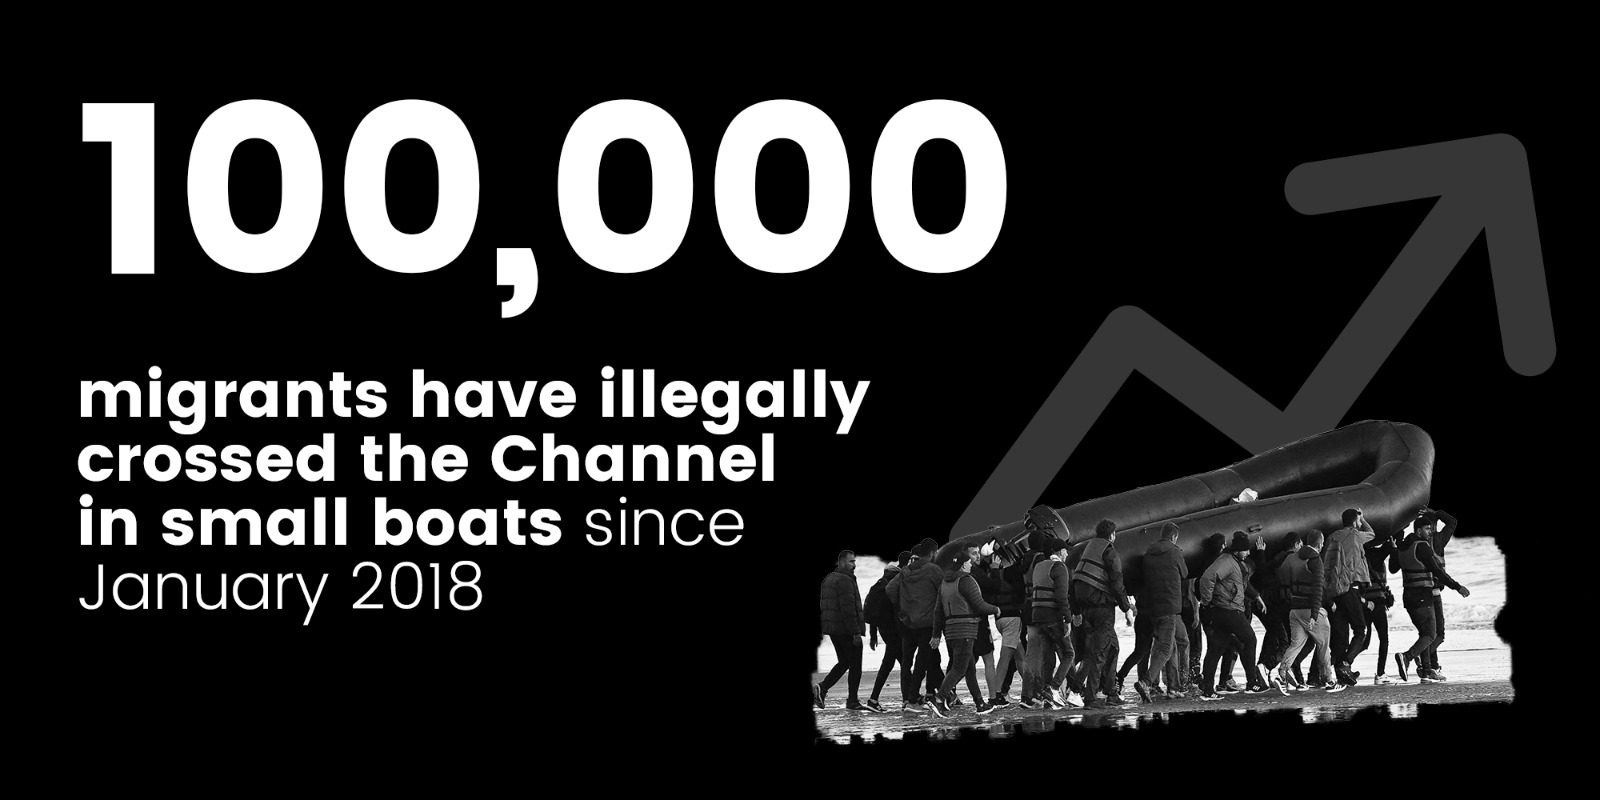 yes-100000-illegal-channel-crossers-in-small-boats-since-2018